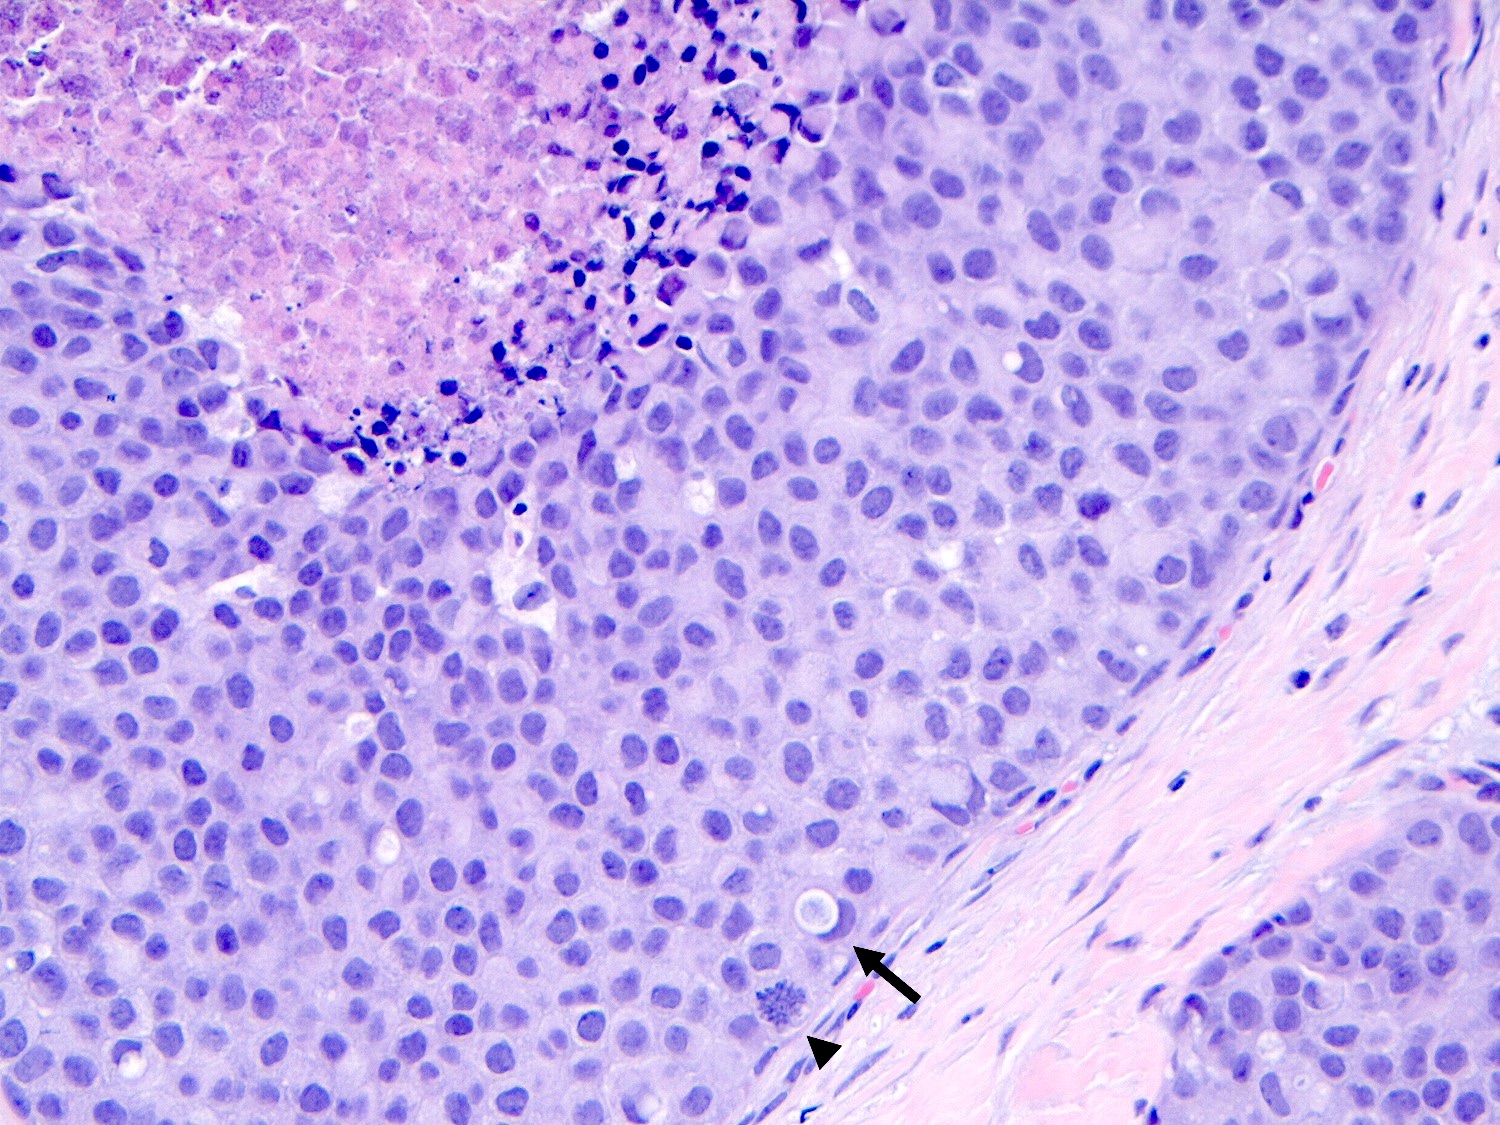 PLCIS with central necrosis and calcifications